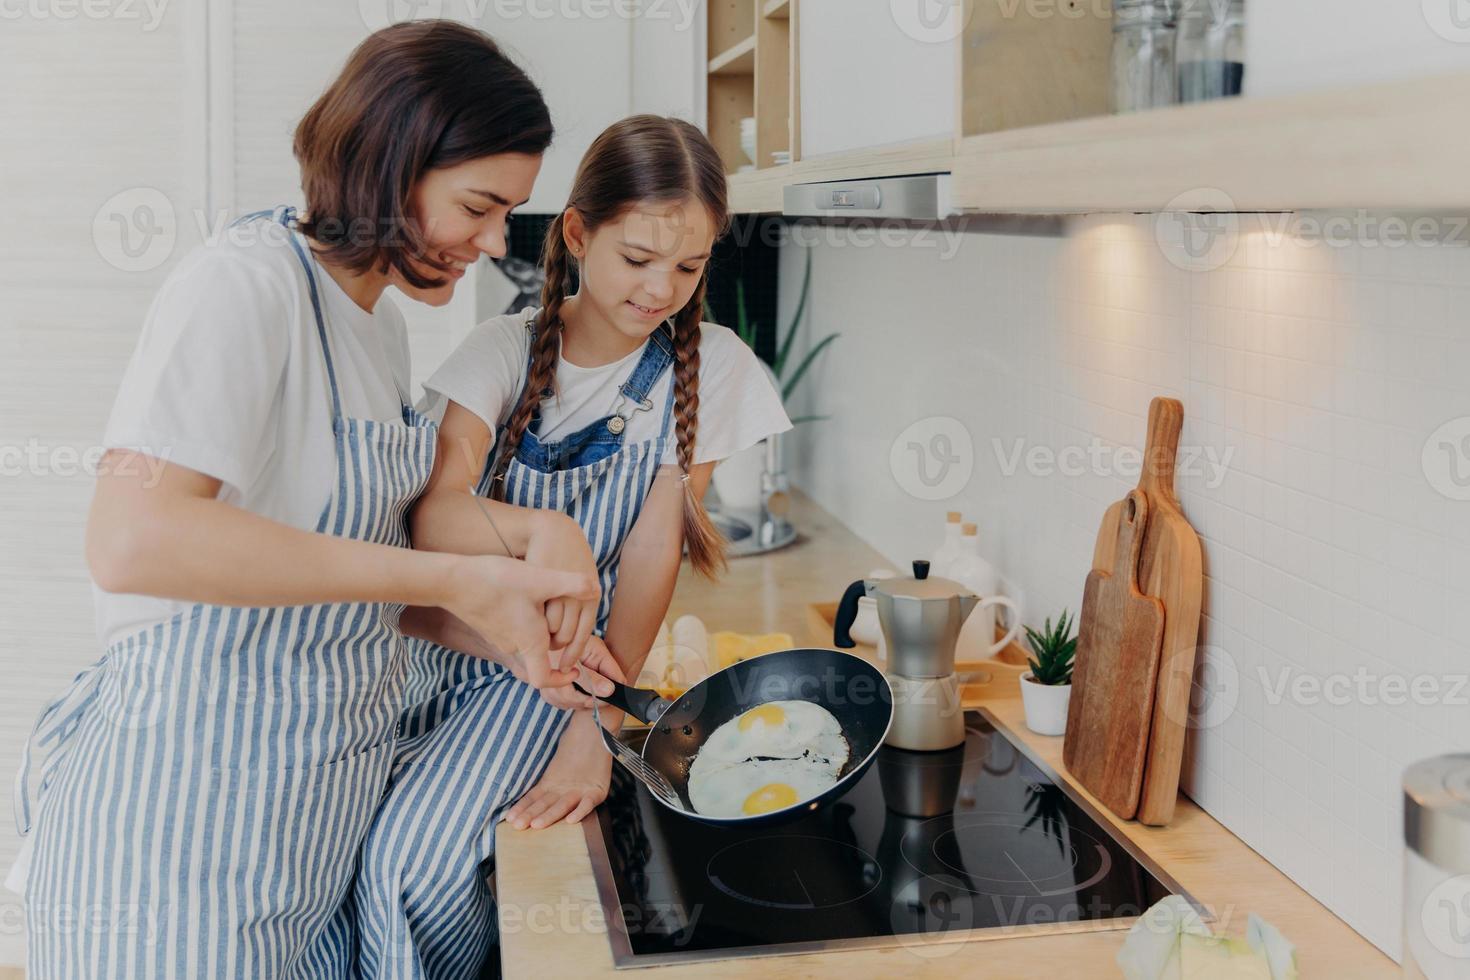 Busy mother and daughter wear striped aprons, pose at kitchen near cooker, fry eggs on pan, prepare fast breakfast, enjoy domestic atmosphere. Mum teaches small kid to cook. Happy family concept photo